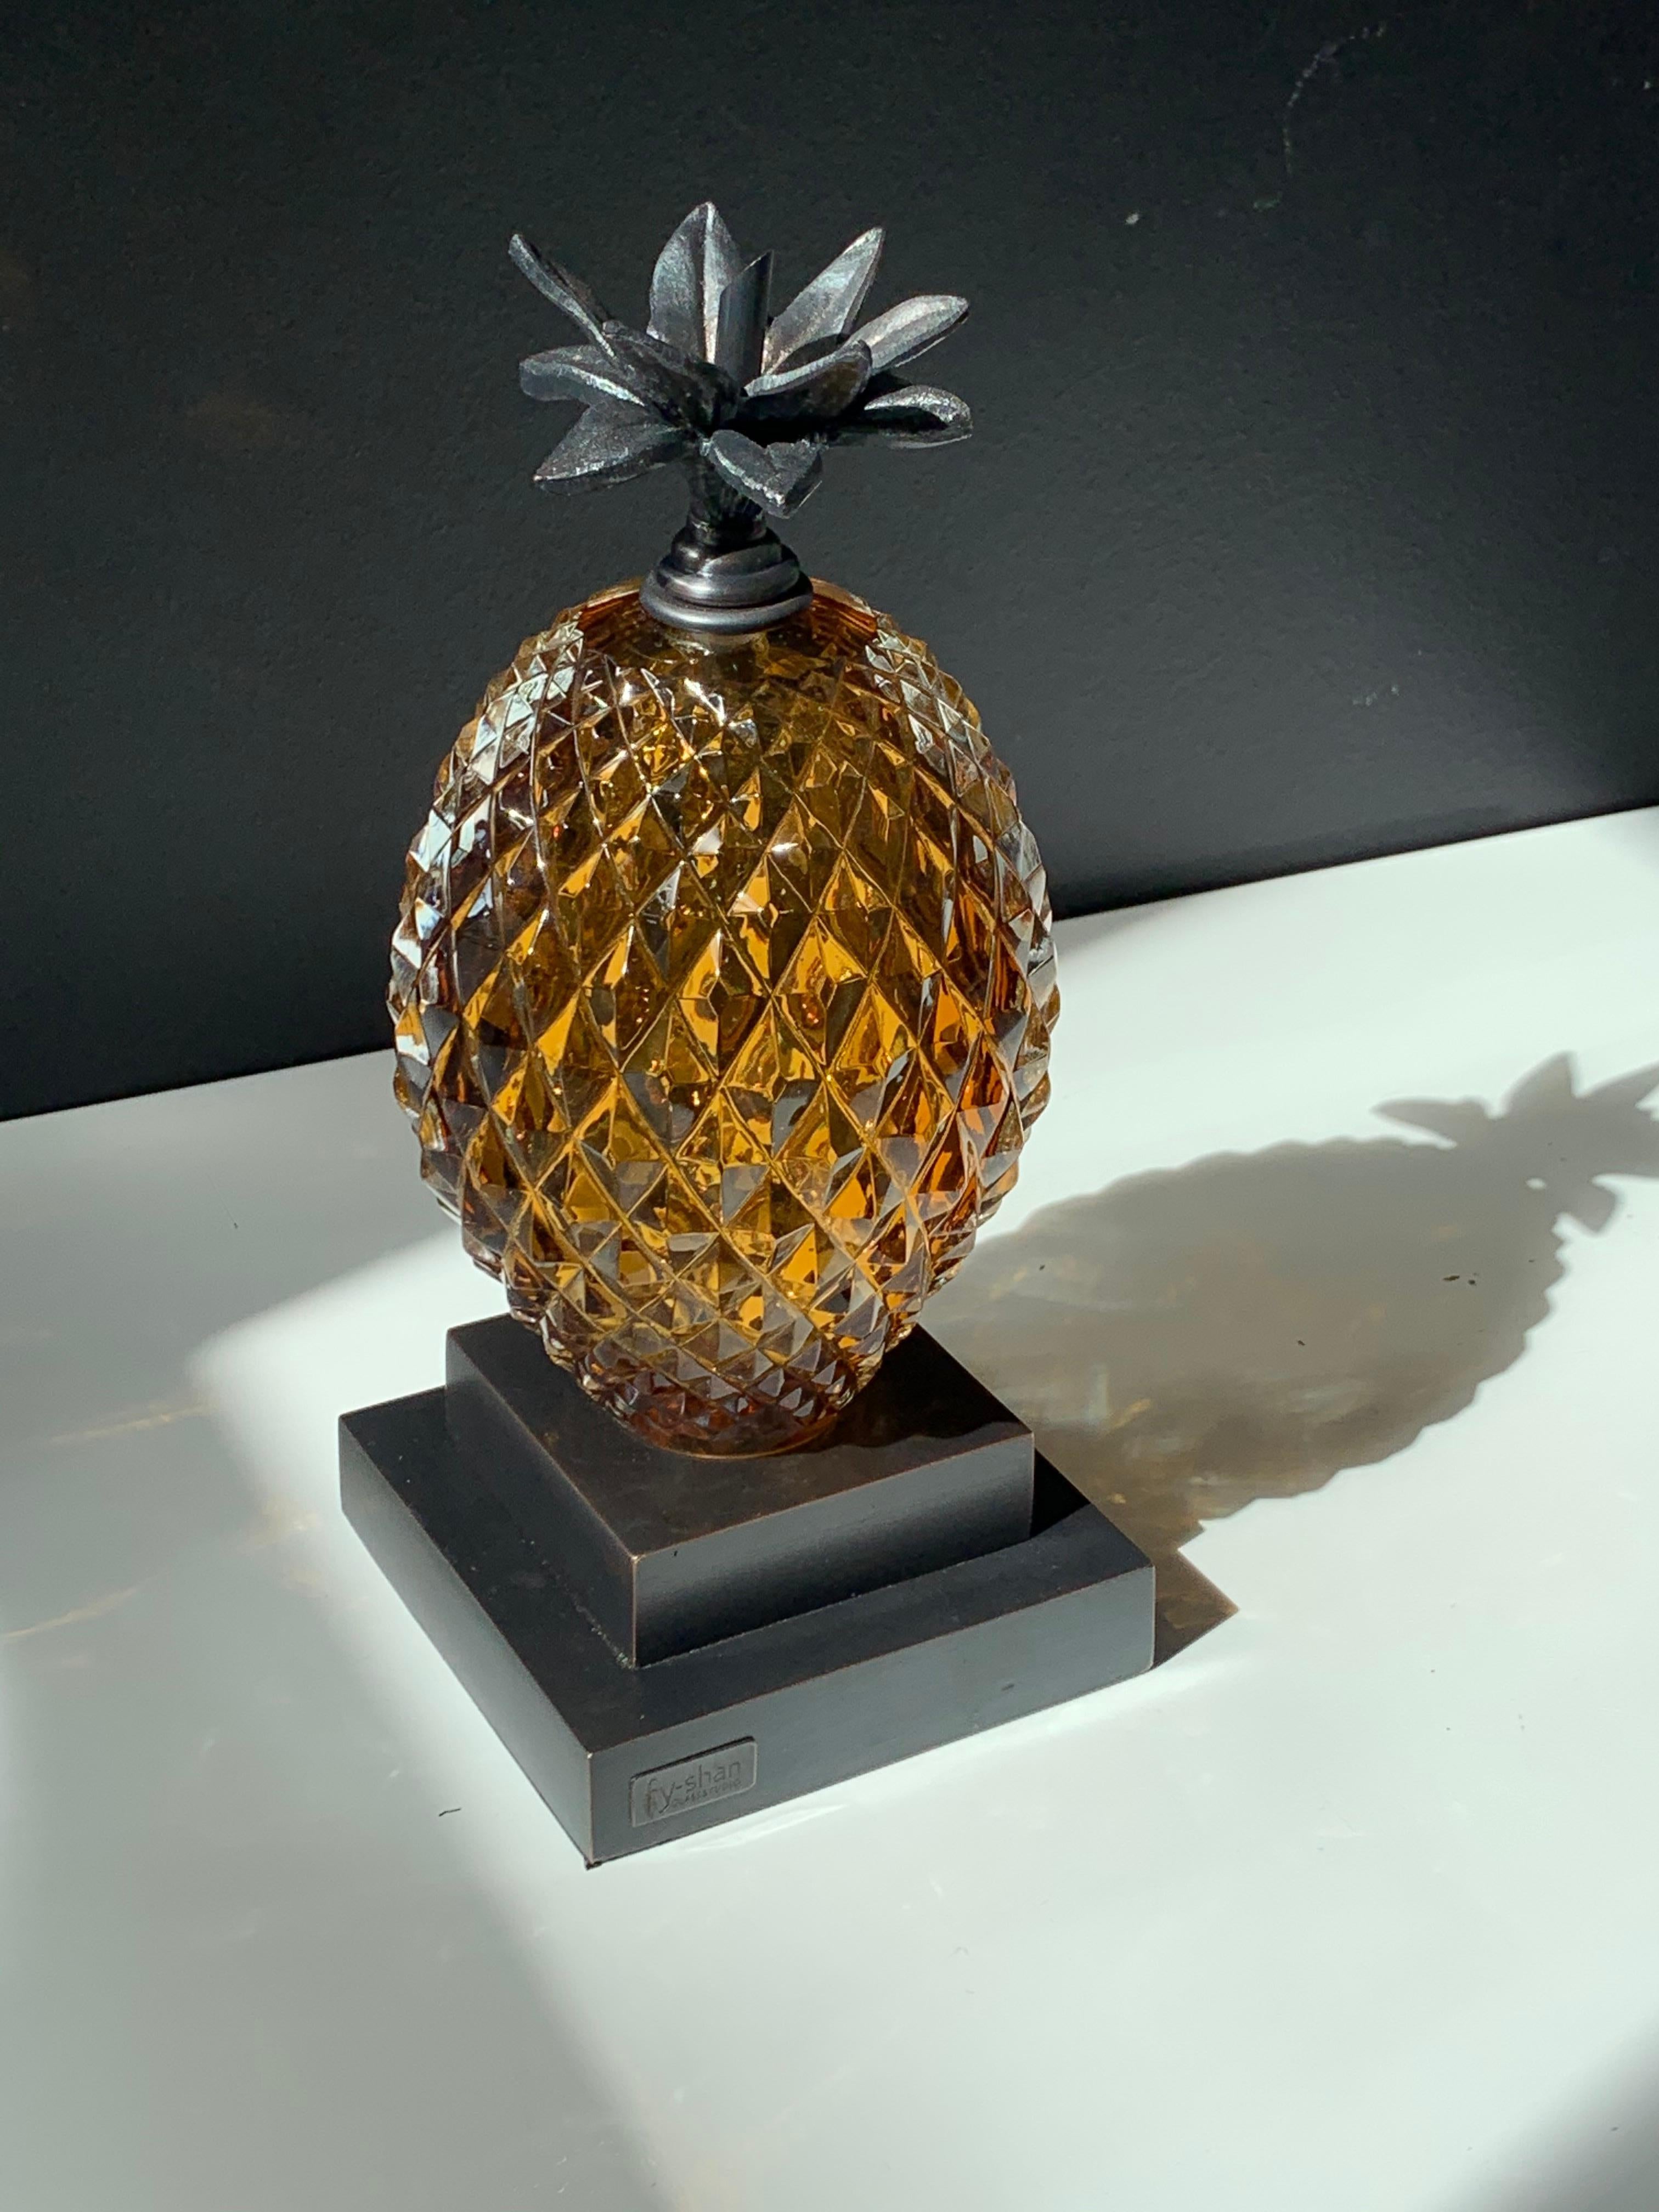 Mouth blown and hand carved amber color glass pineapple coupled with cast metal stand and leaf motif to work as a bookend or an accent piece in timeless interiors.